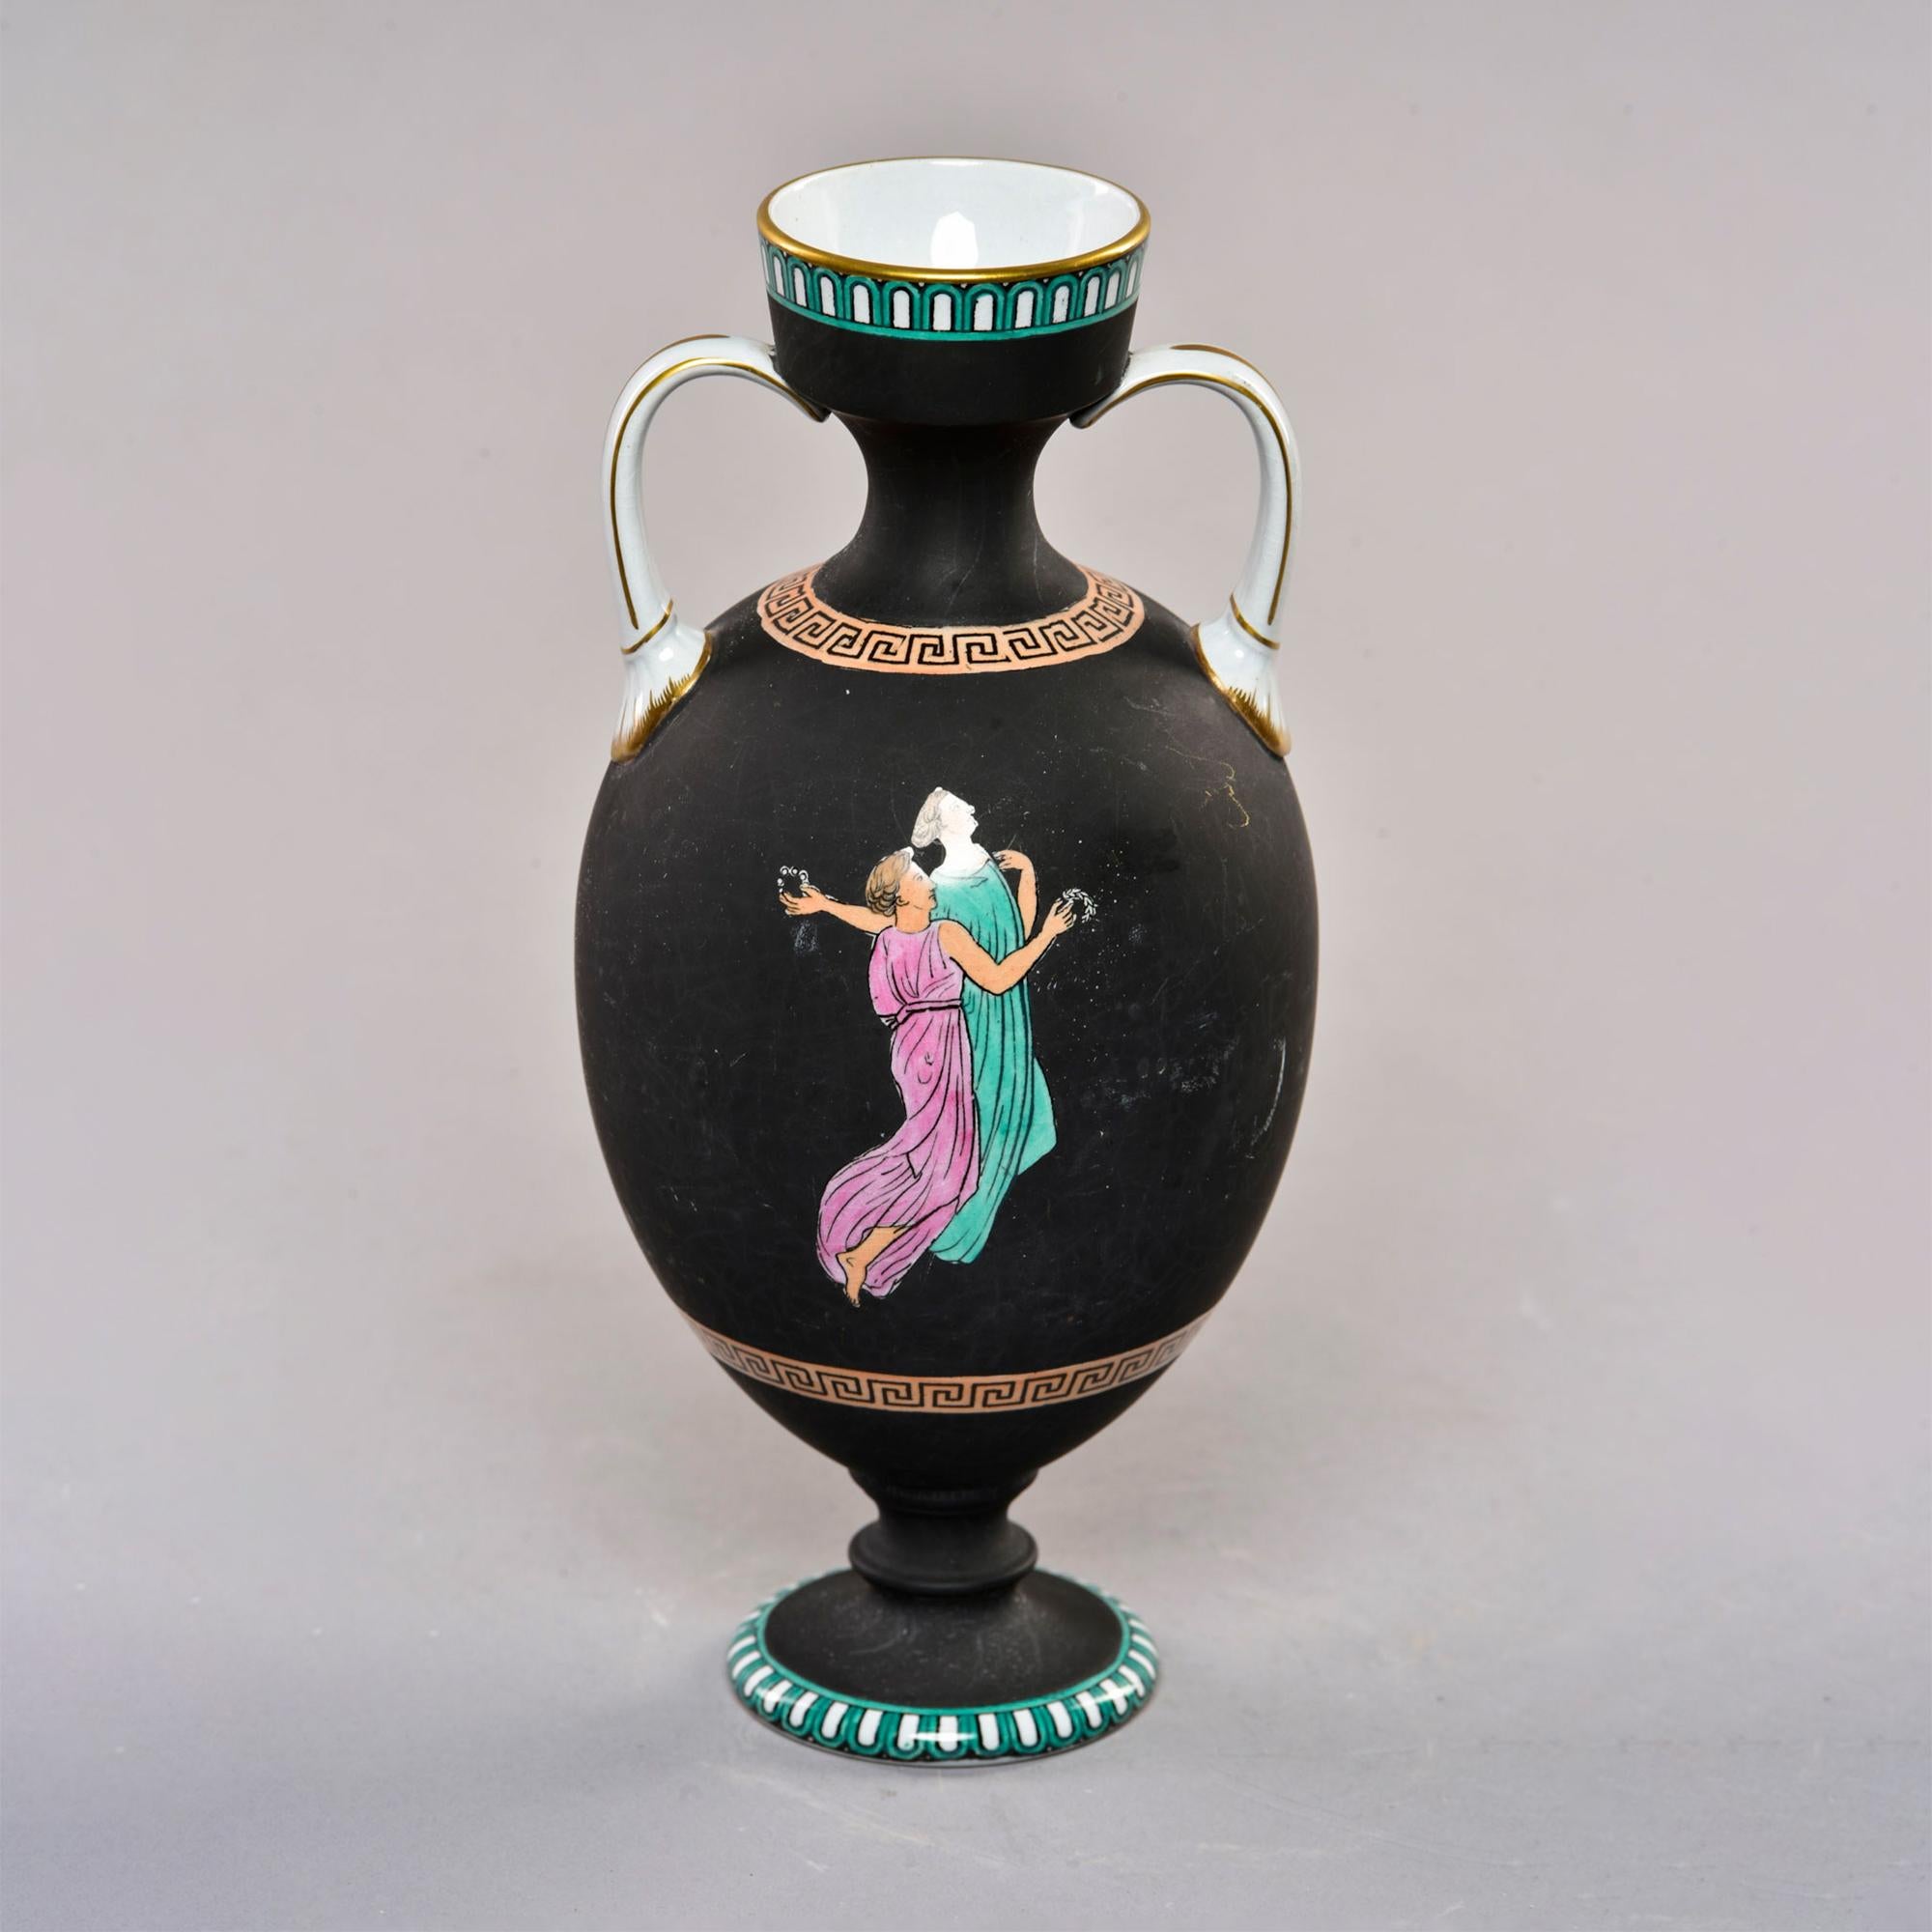 Circa 1890s black porcelain neoclassical vase found in England in amphora form with hole in base - probably intended to be a lamp. Colors still vibrant and true - white blur on figures seen in some detail photos is the reflection of our photo lights